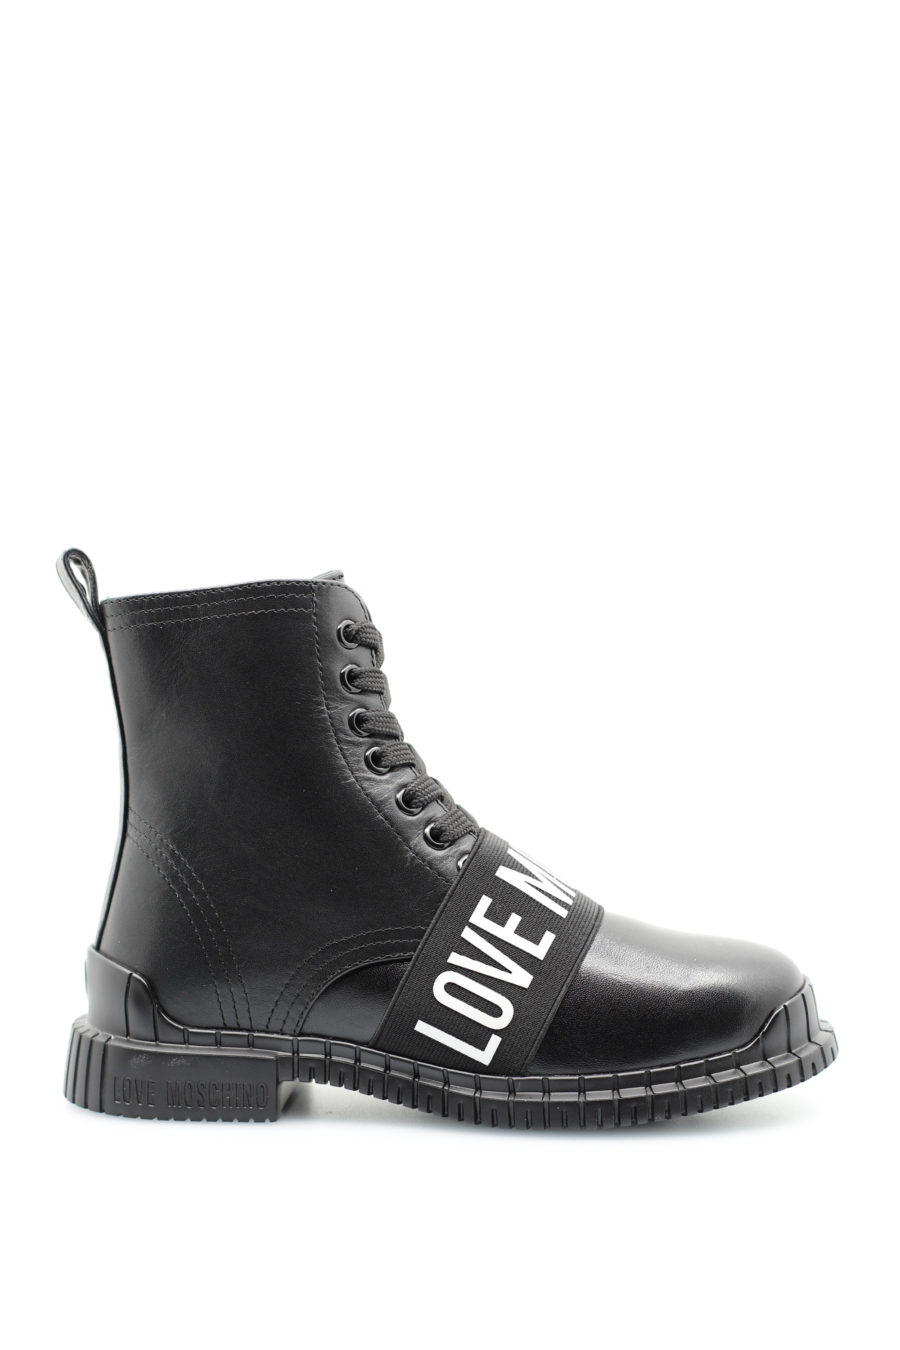 Black ankle boots with large logo - 506257d24c857a4a0fe61f30f30c0f3336032572bf8